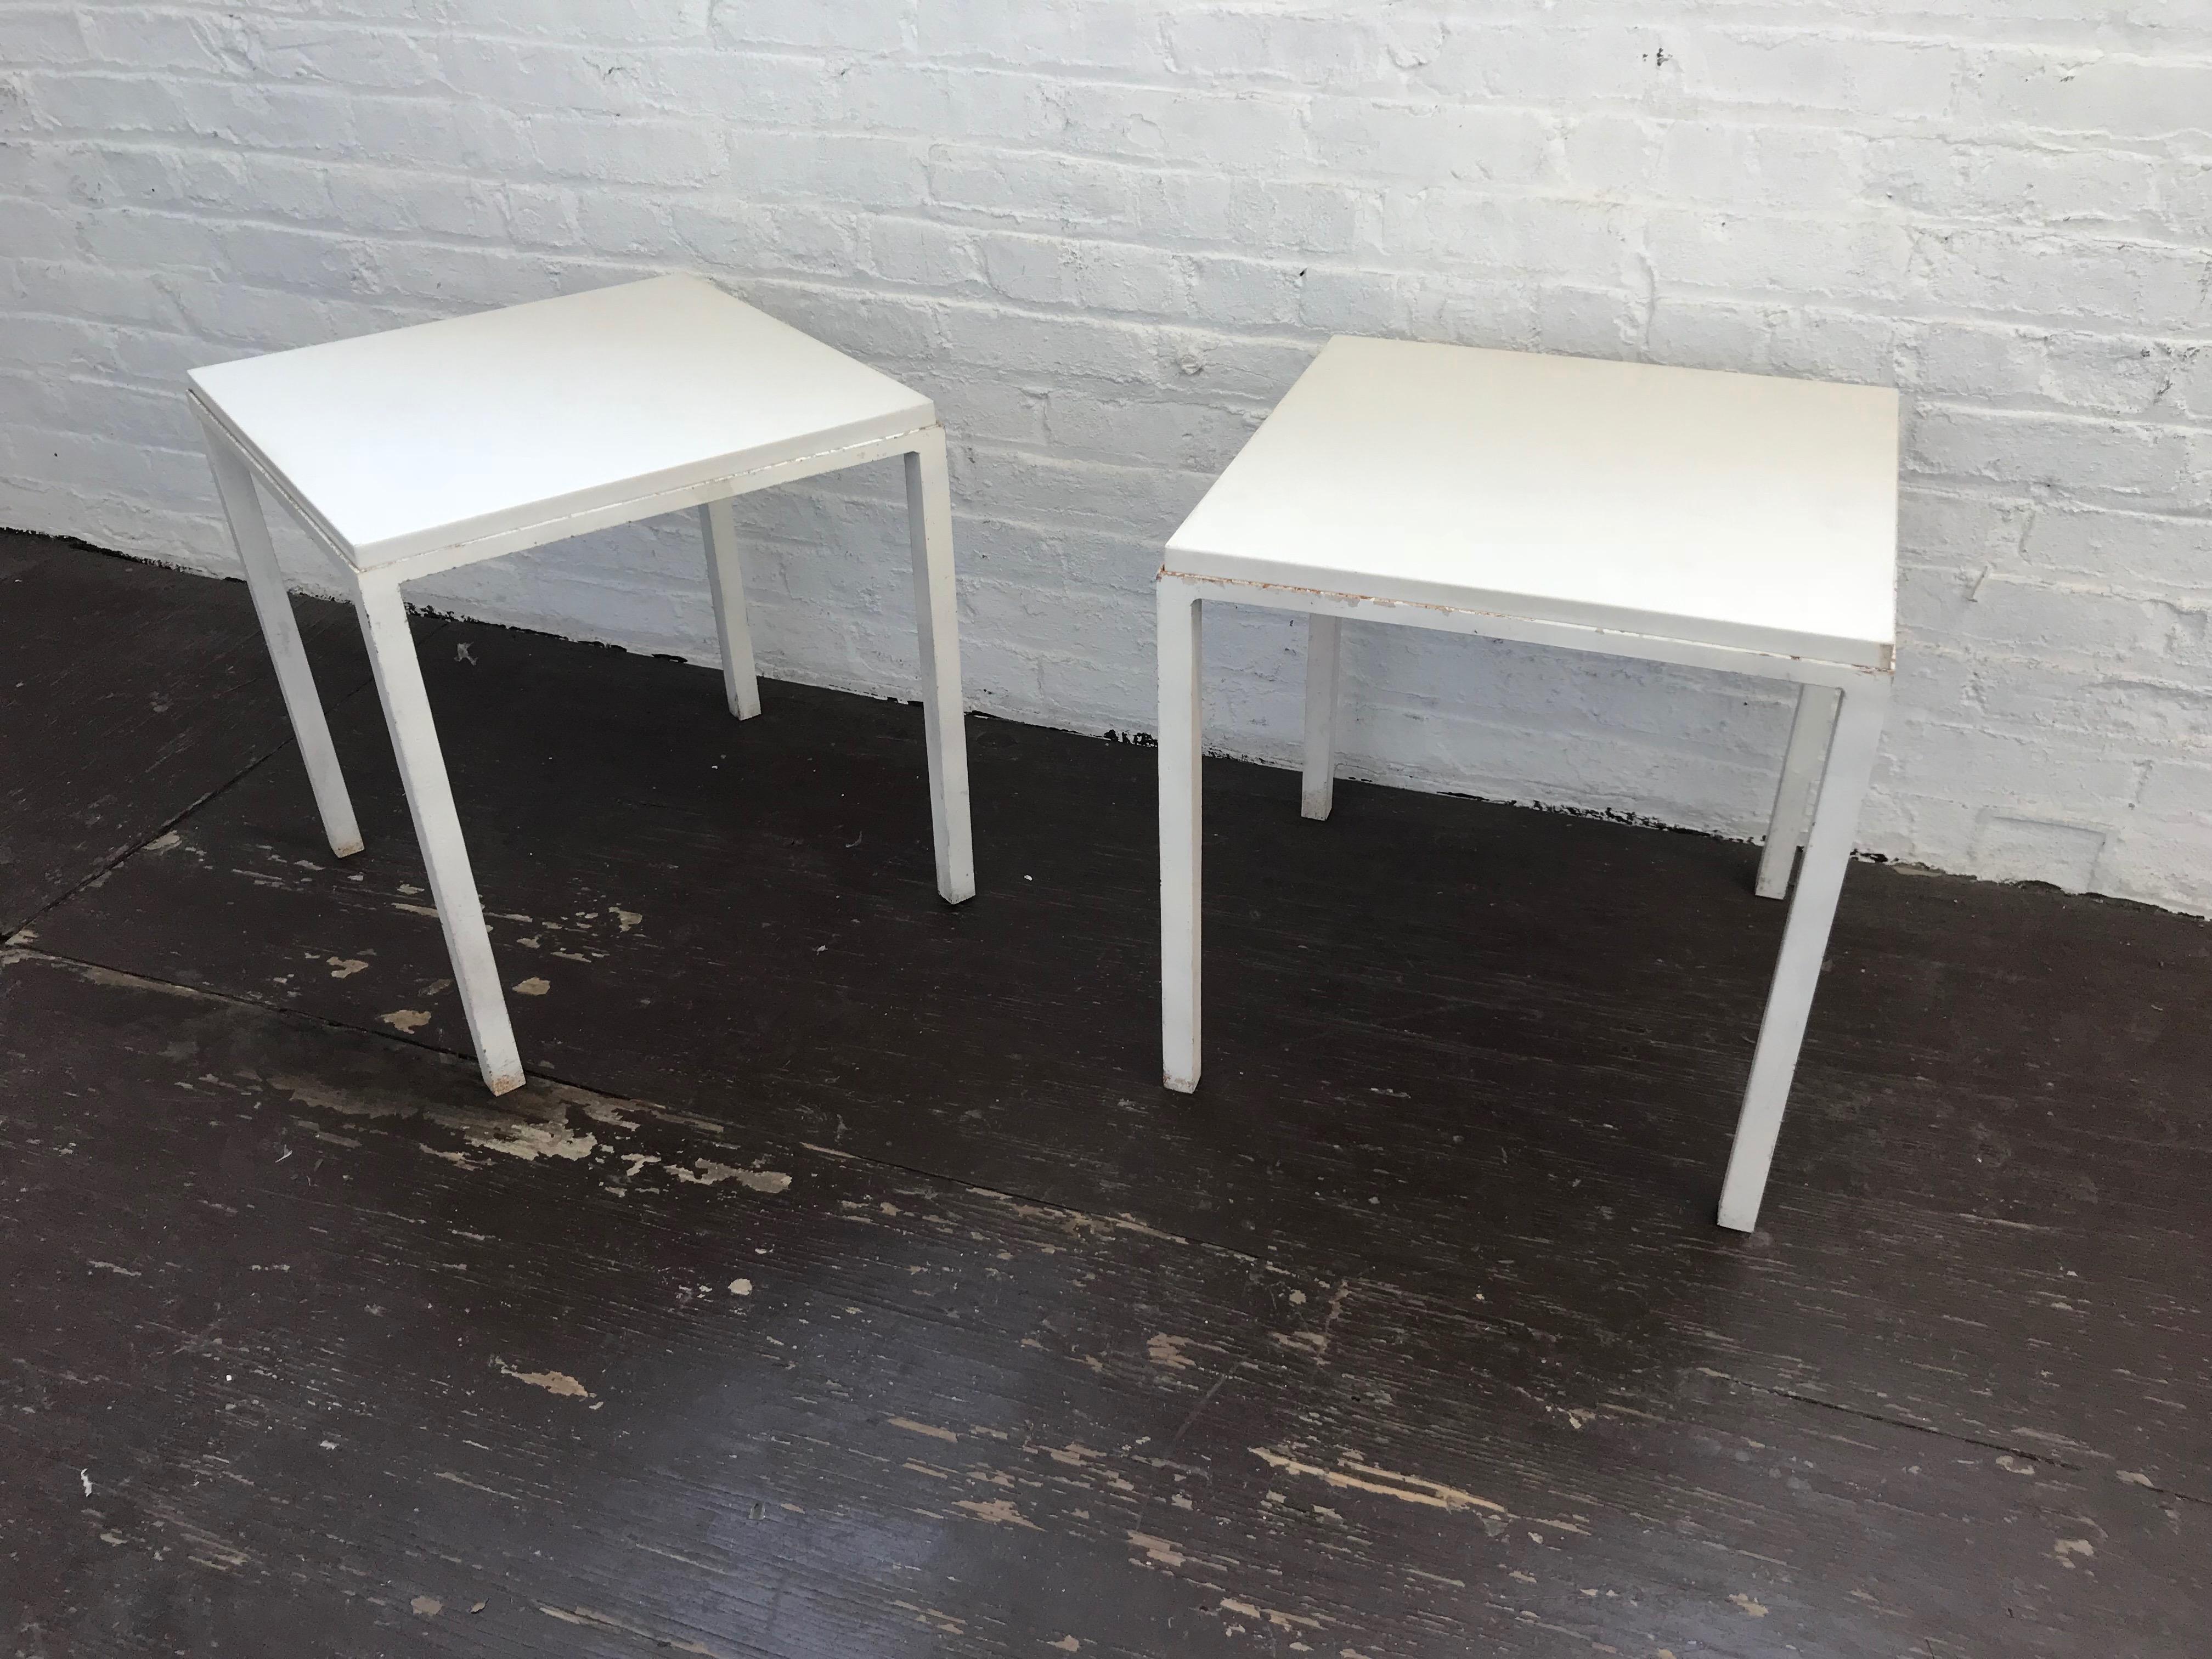 Pair of White Enameled Metal and Granite Side Tables, USA, circa 1955 In Good Condition For Sale In Jersey City, NJ